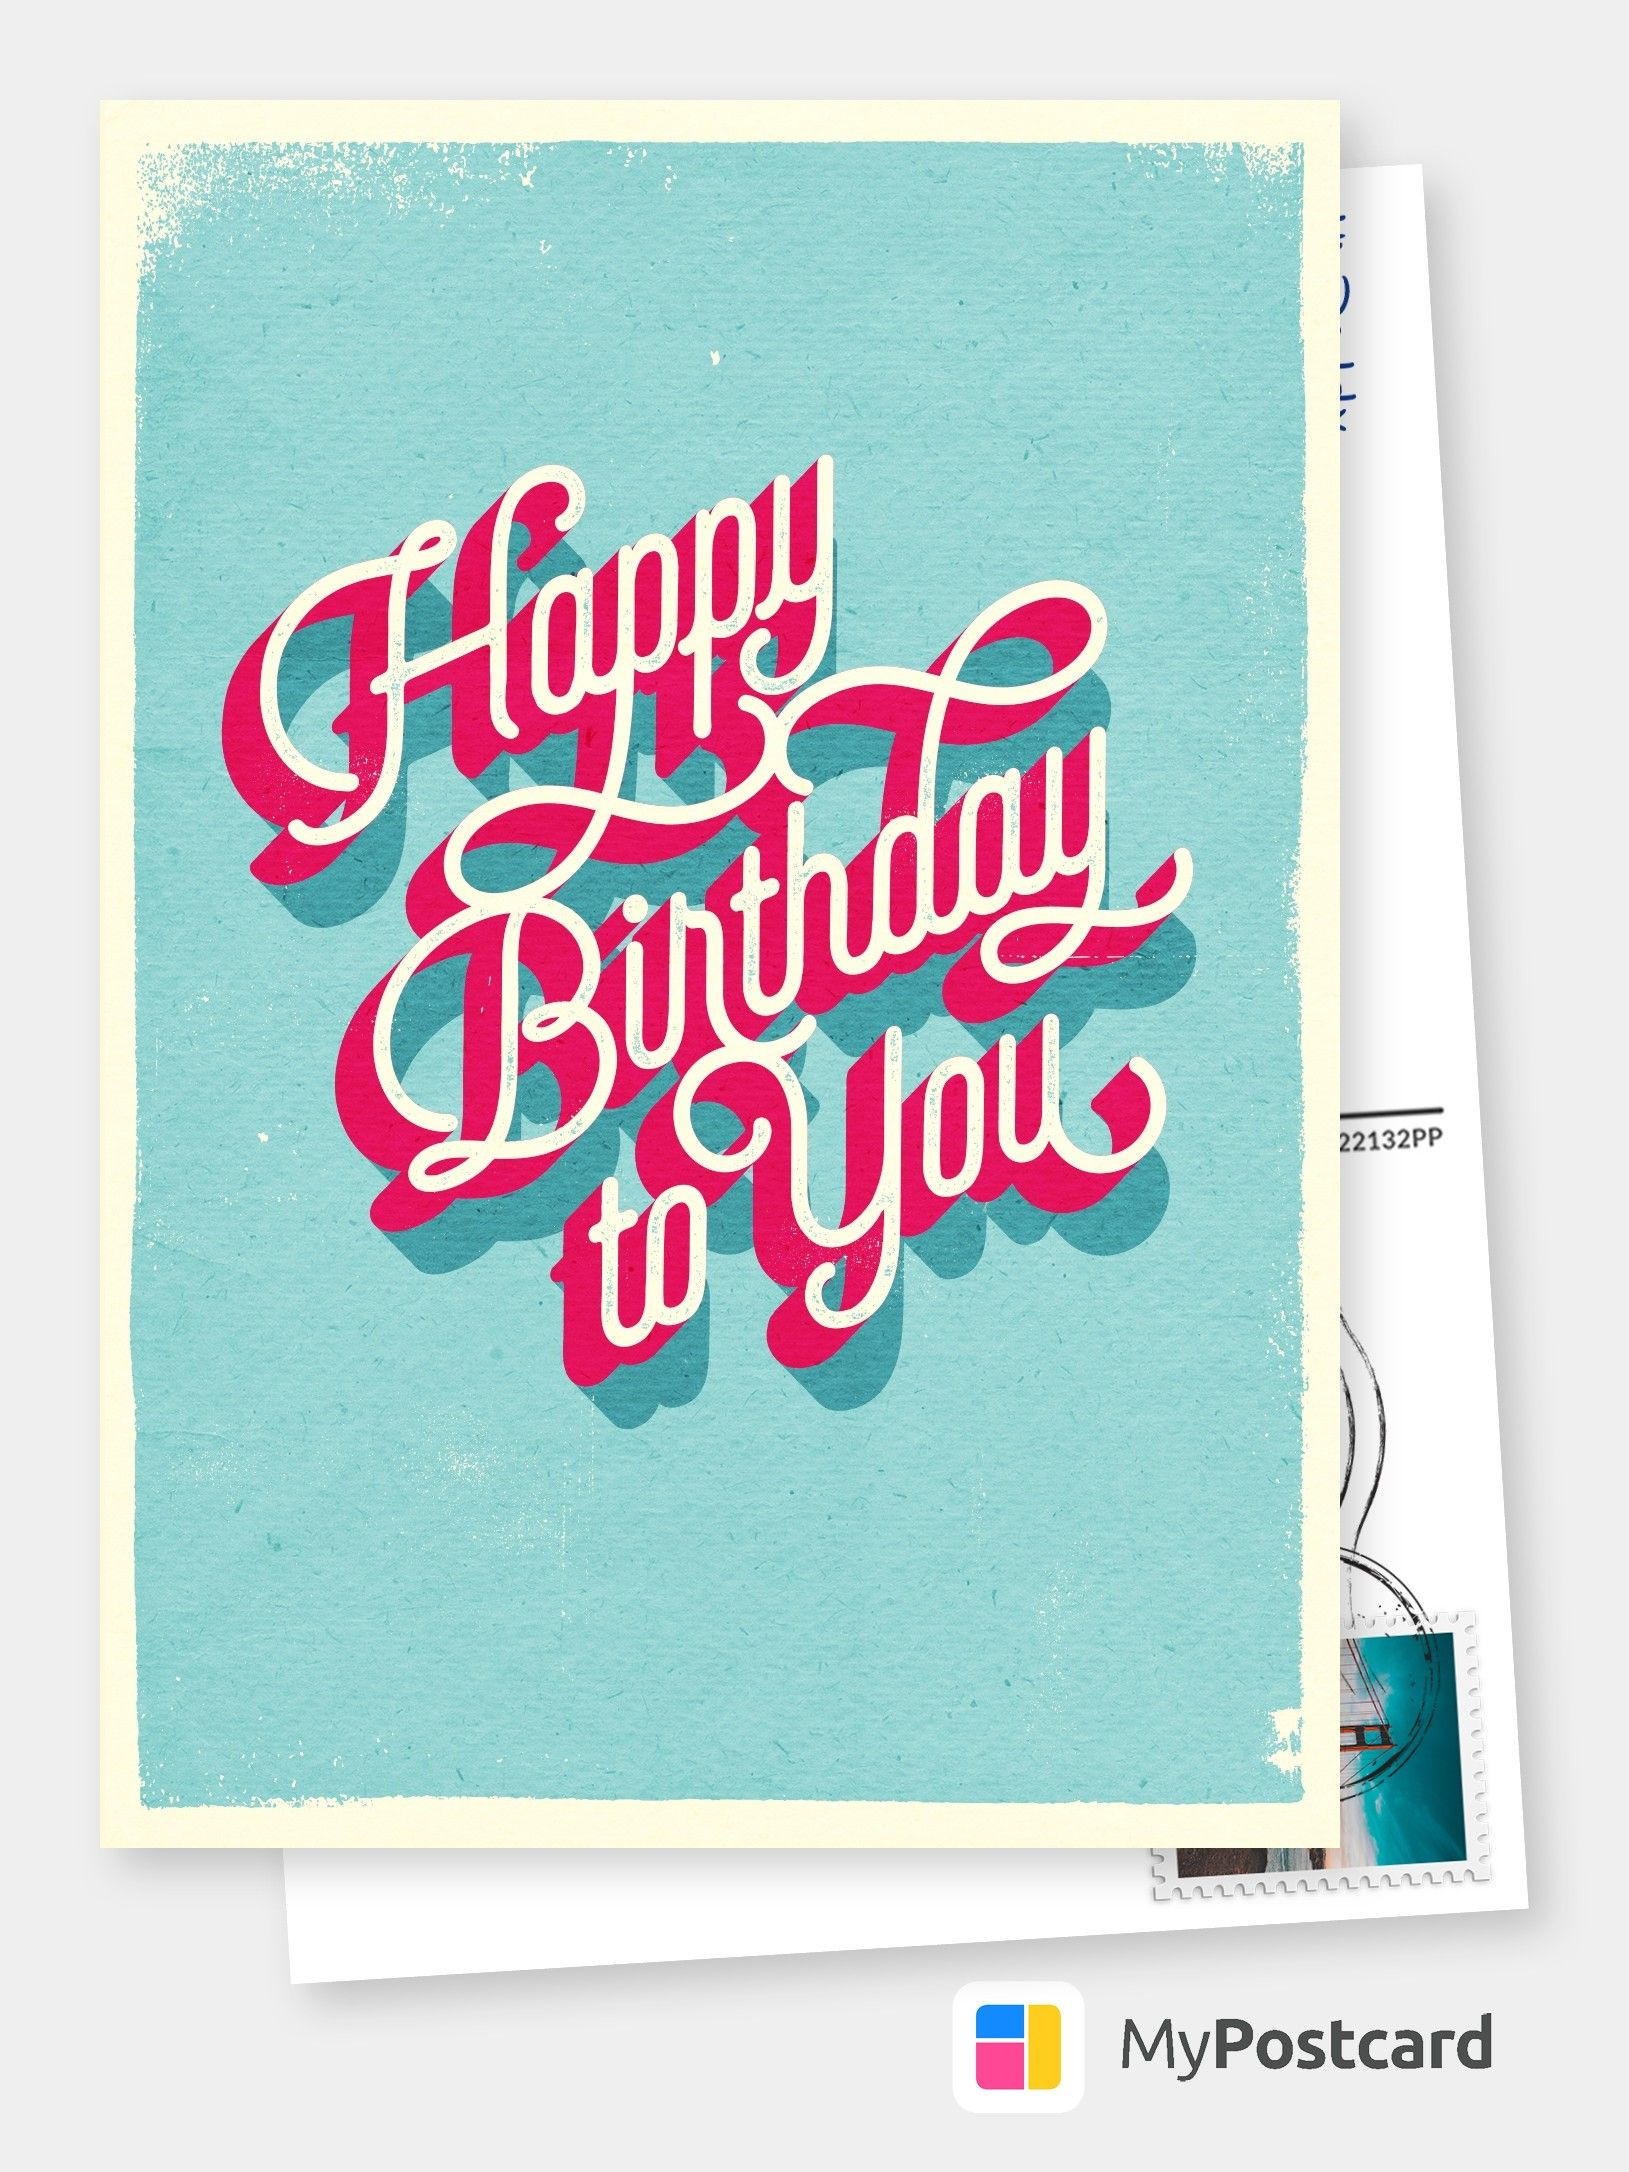 Send A Birthday Card Online
 Send Your Personalized Printed Birthday Cards line